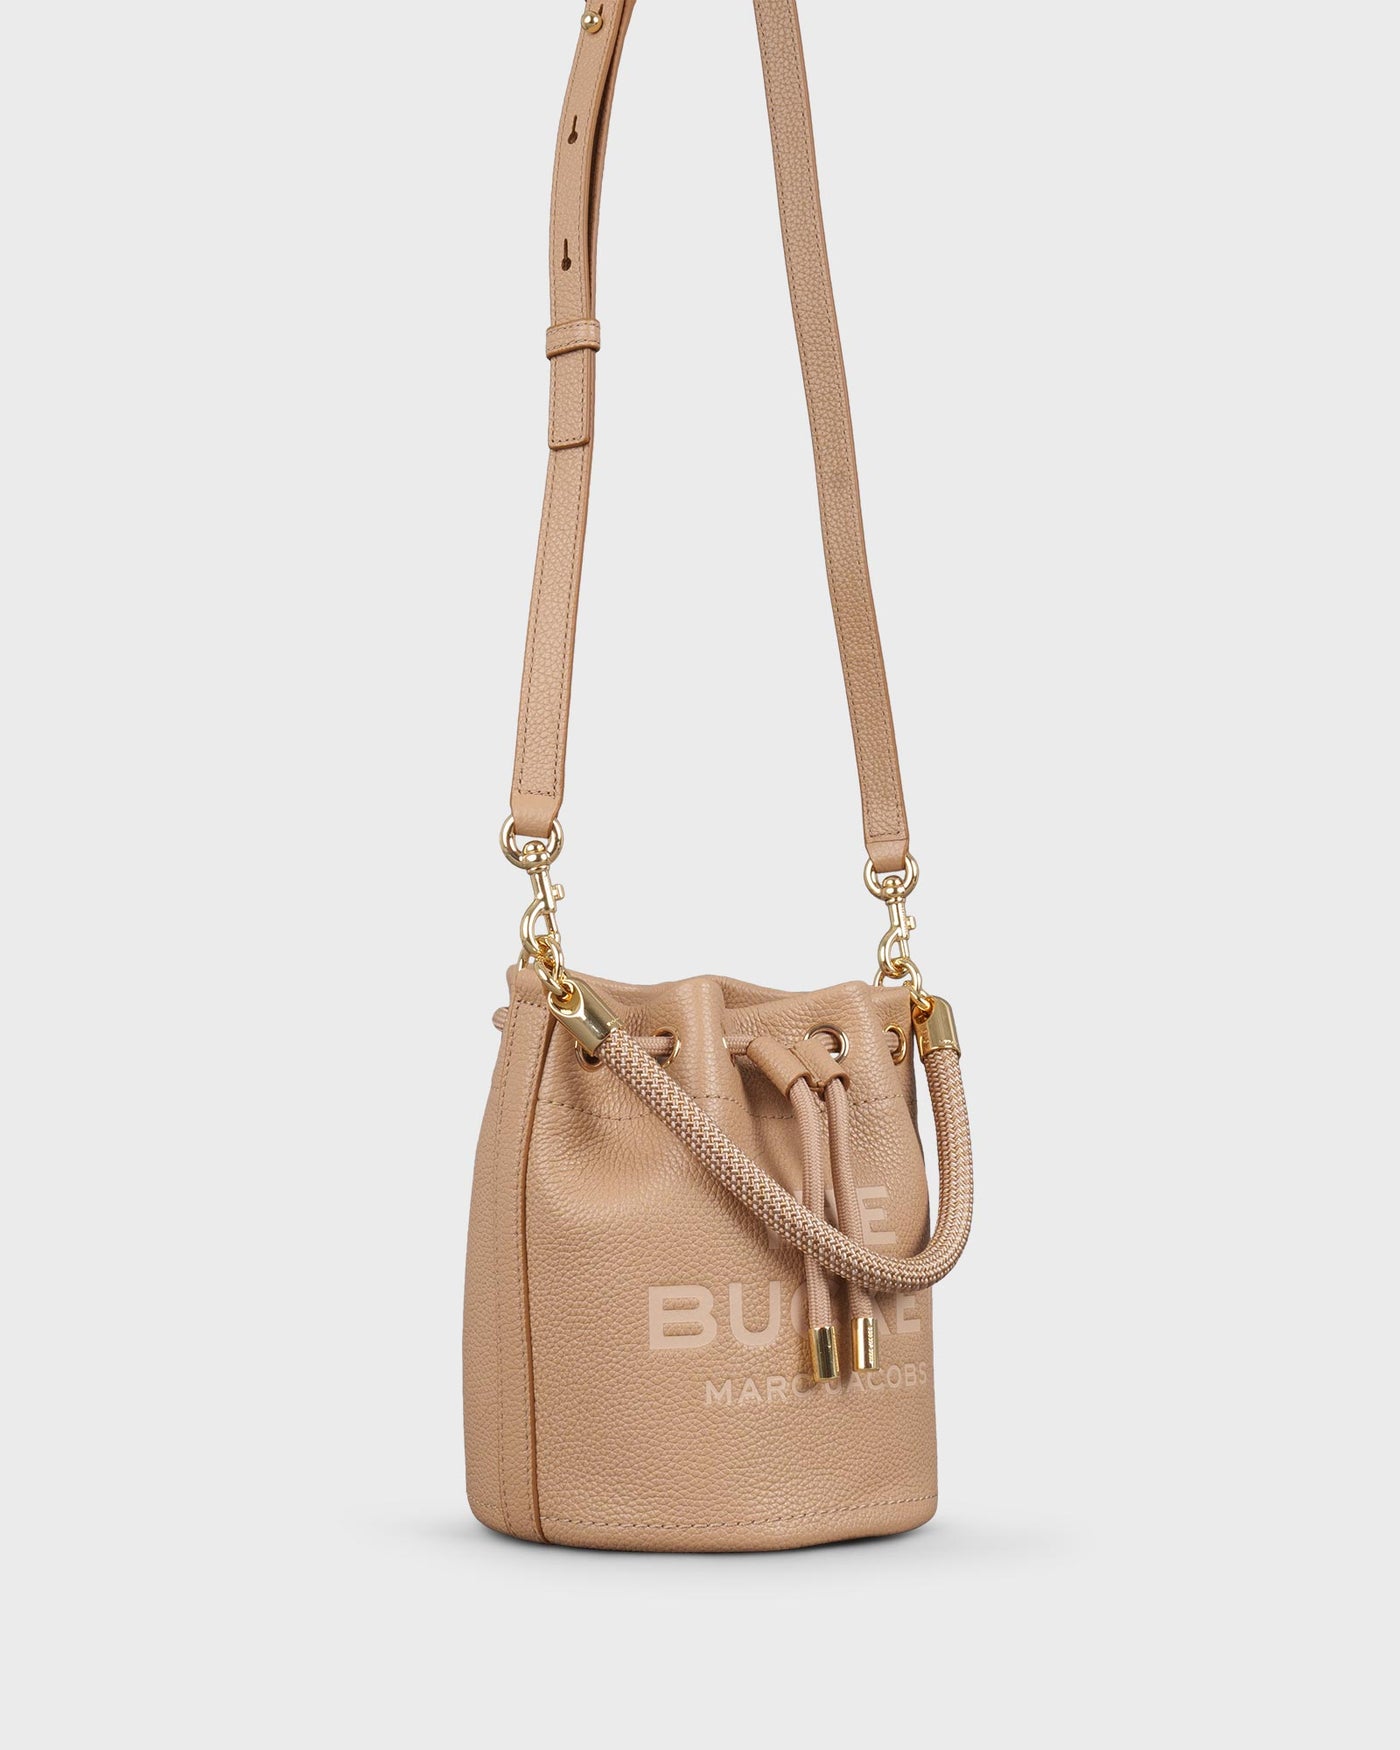 Marc Jacobs Tasche The Leather Bucket Bag Camel myMEID